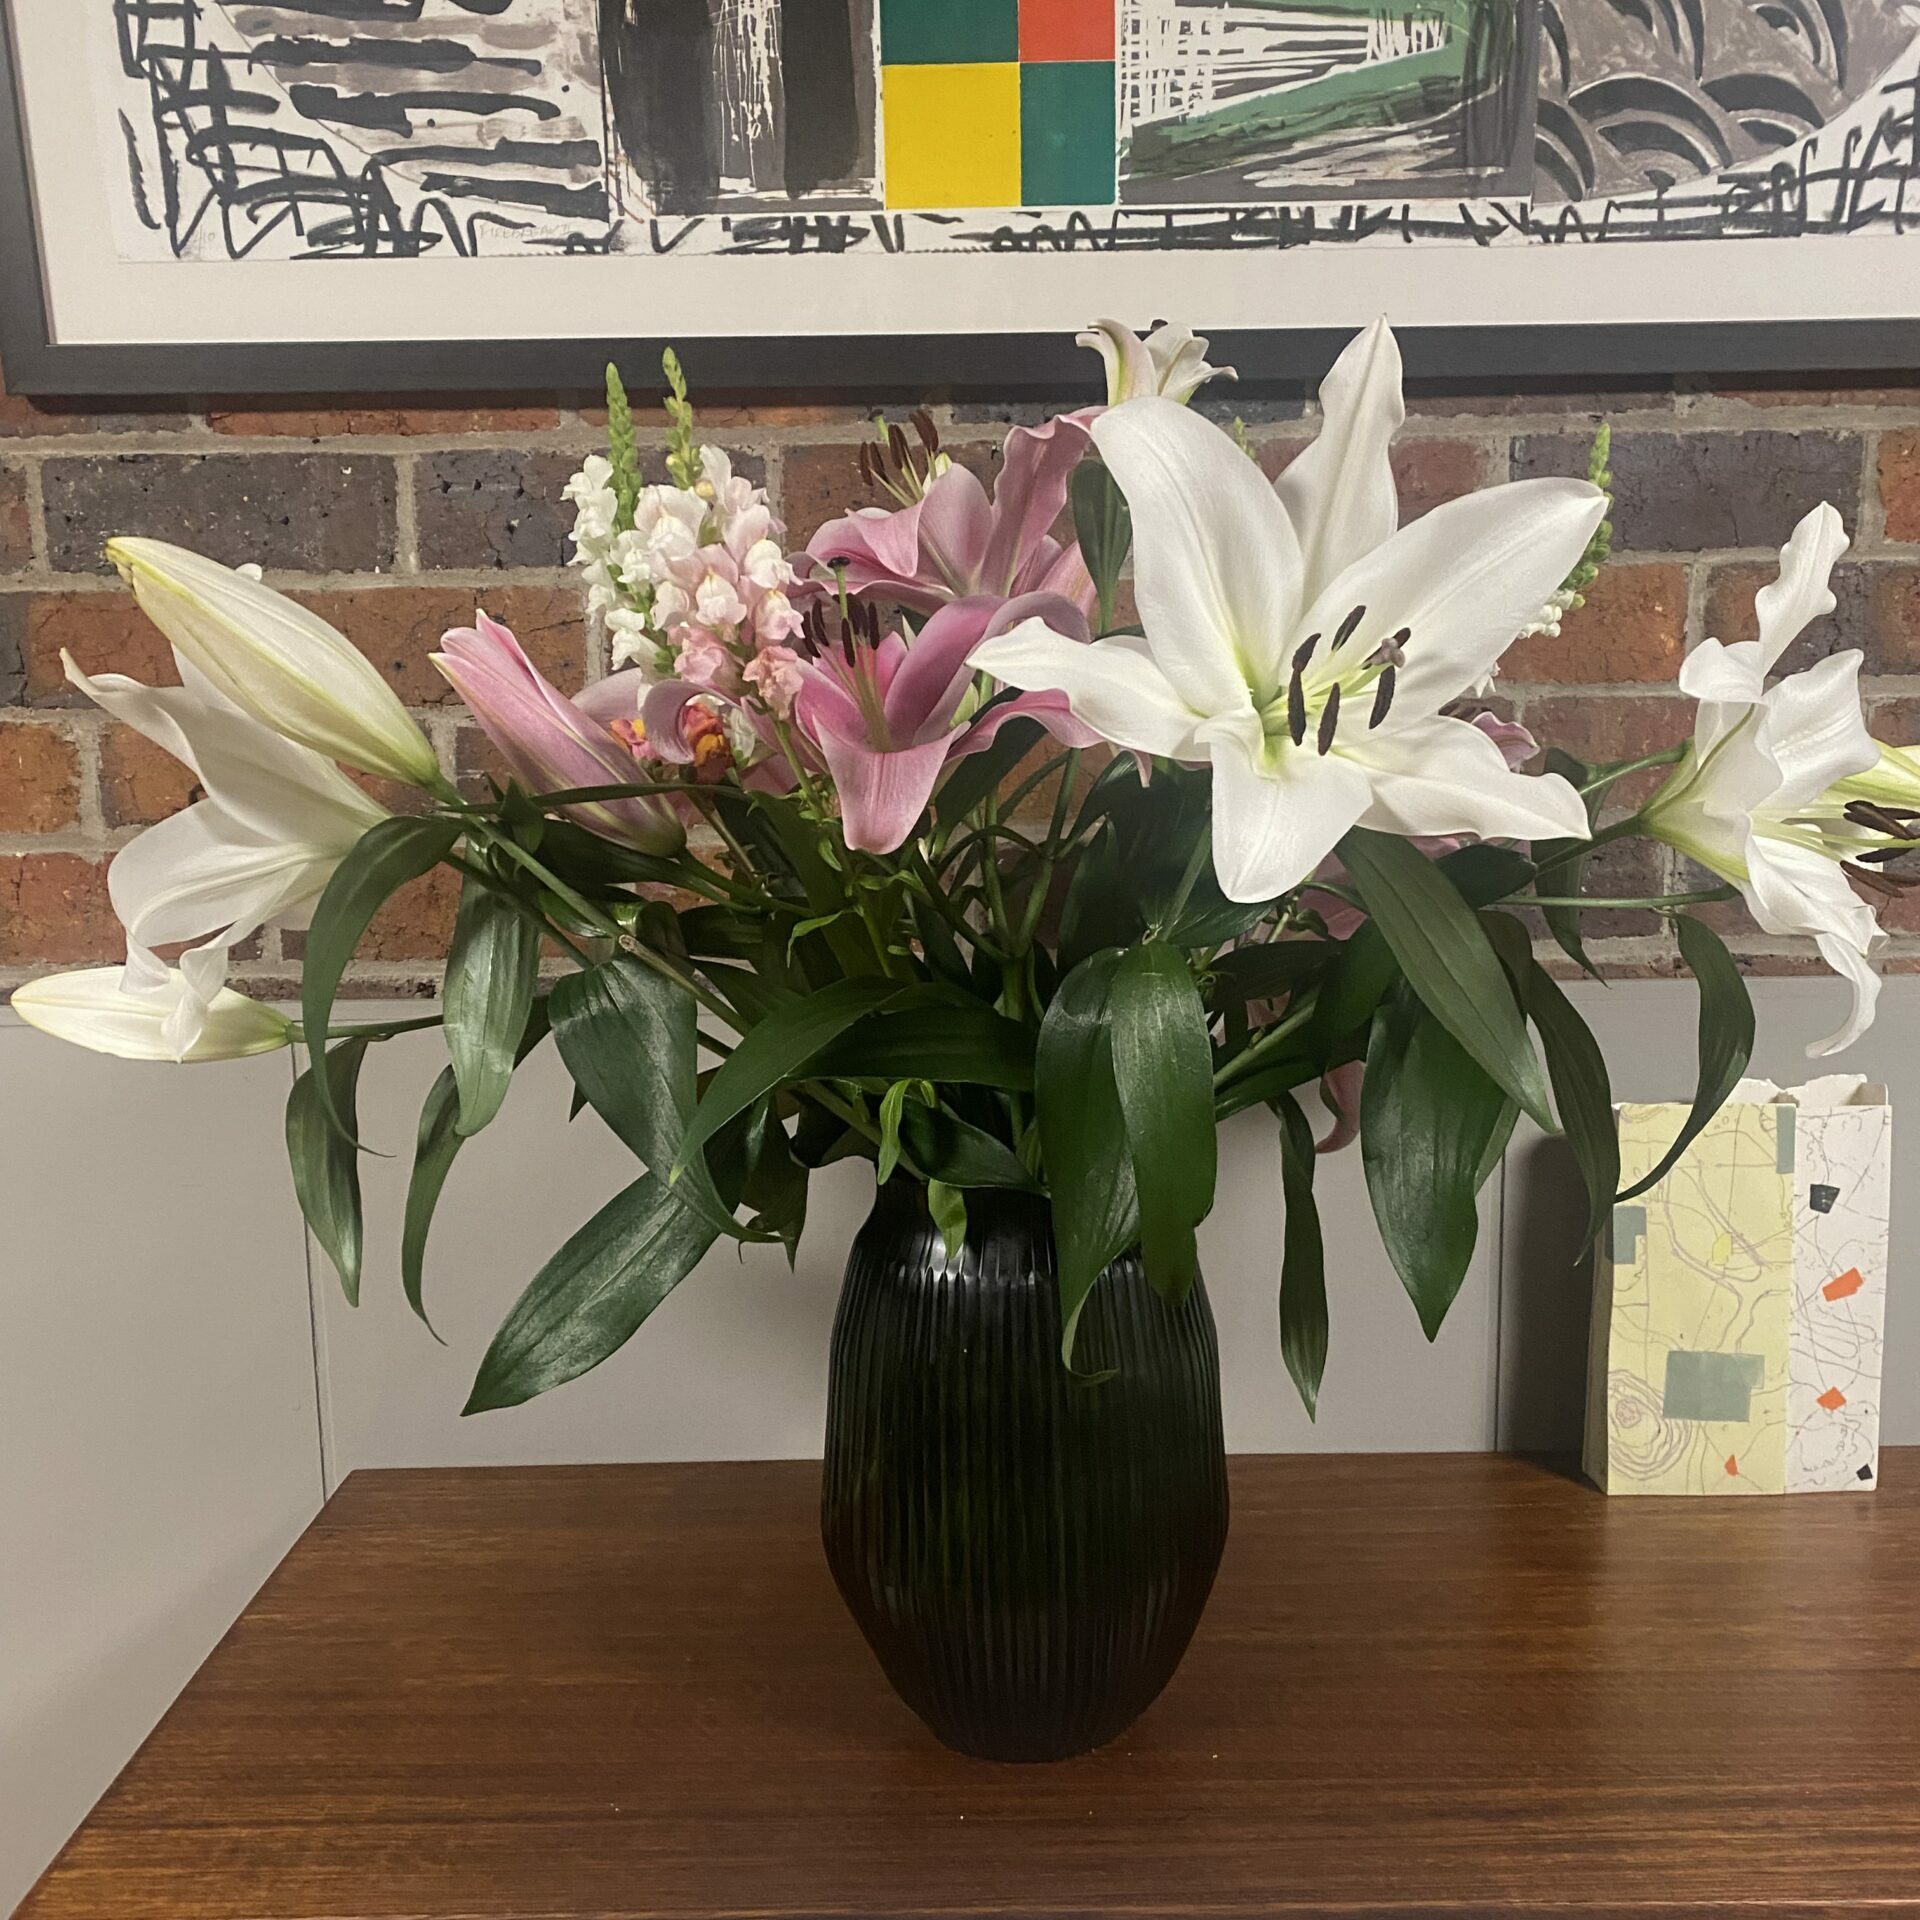 Lily Farm bouquet for Mother's Day, flowers last so well!